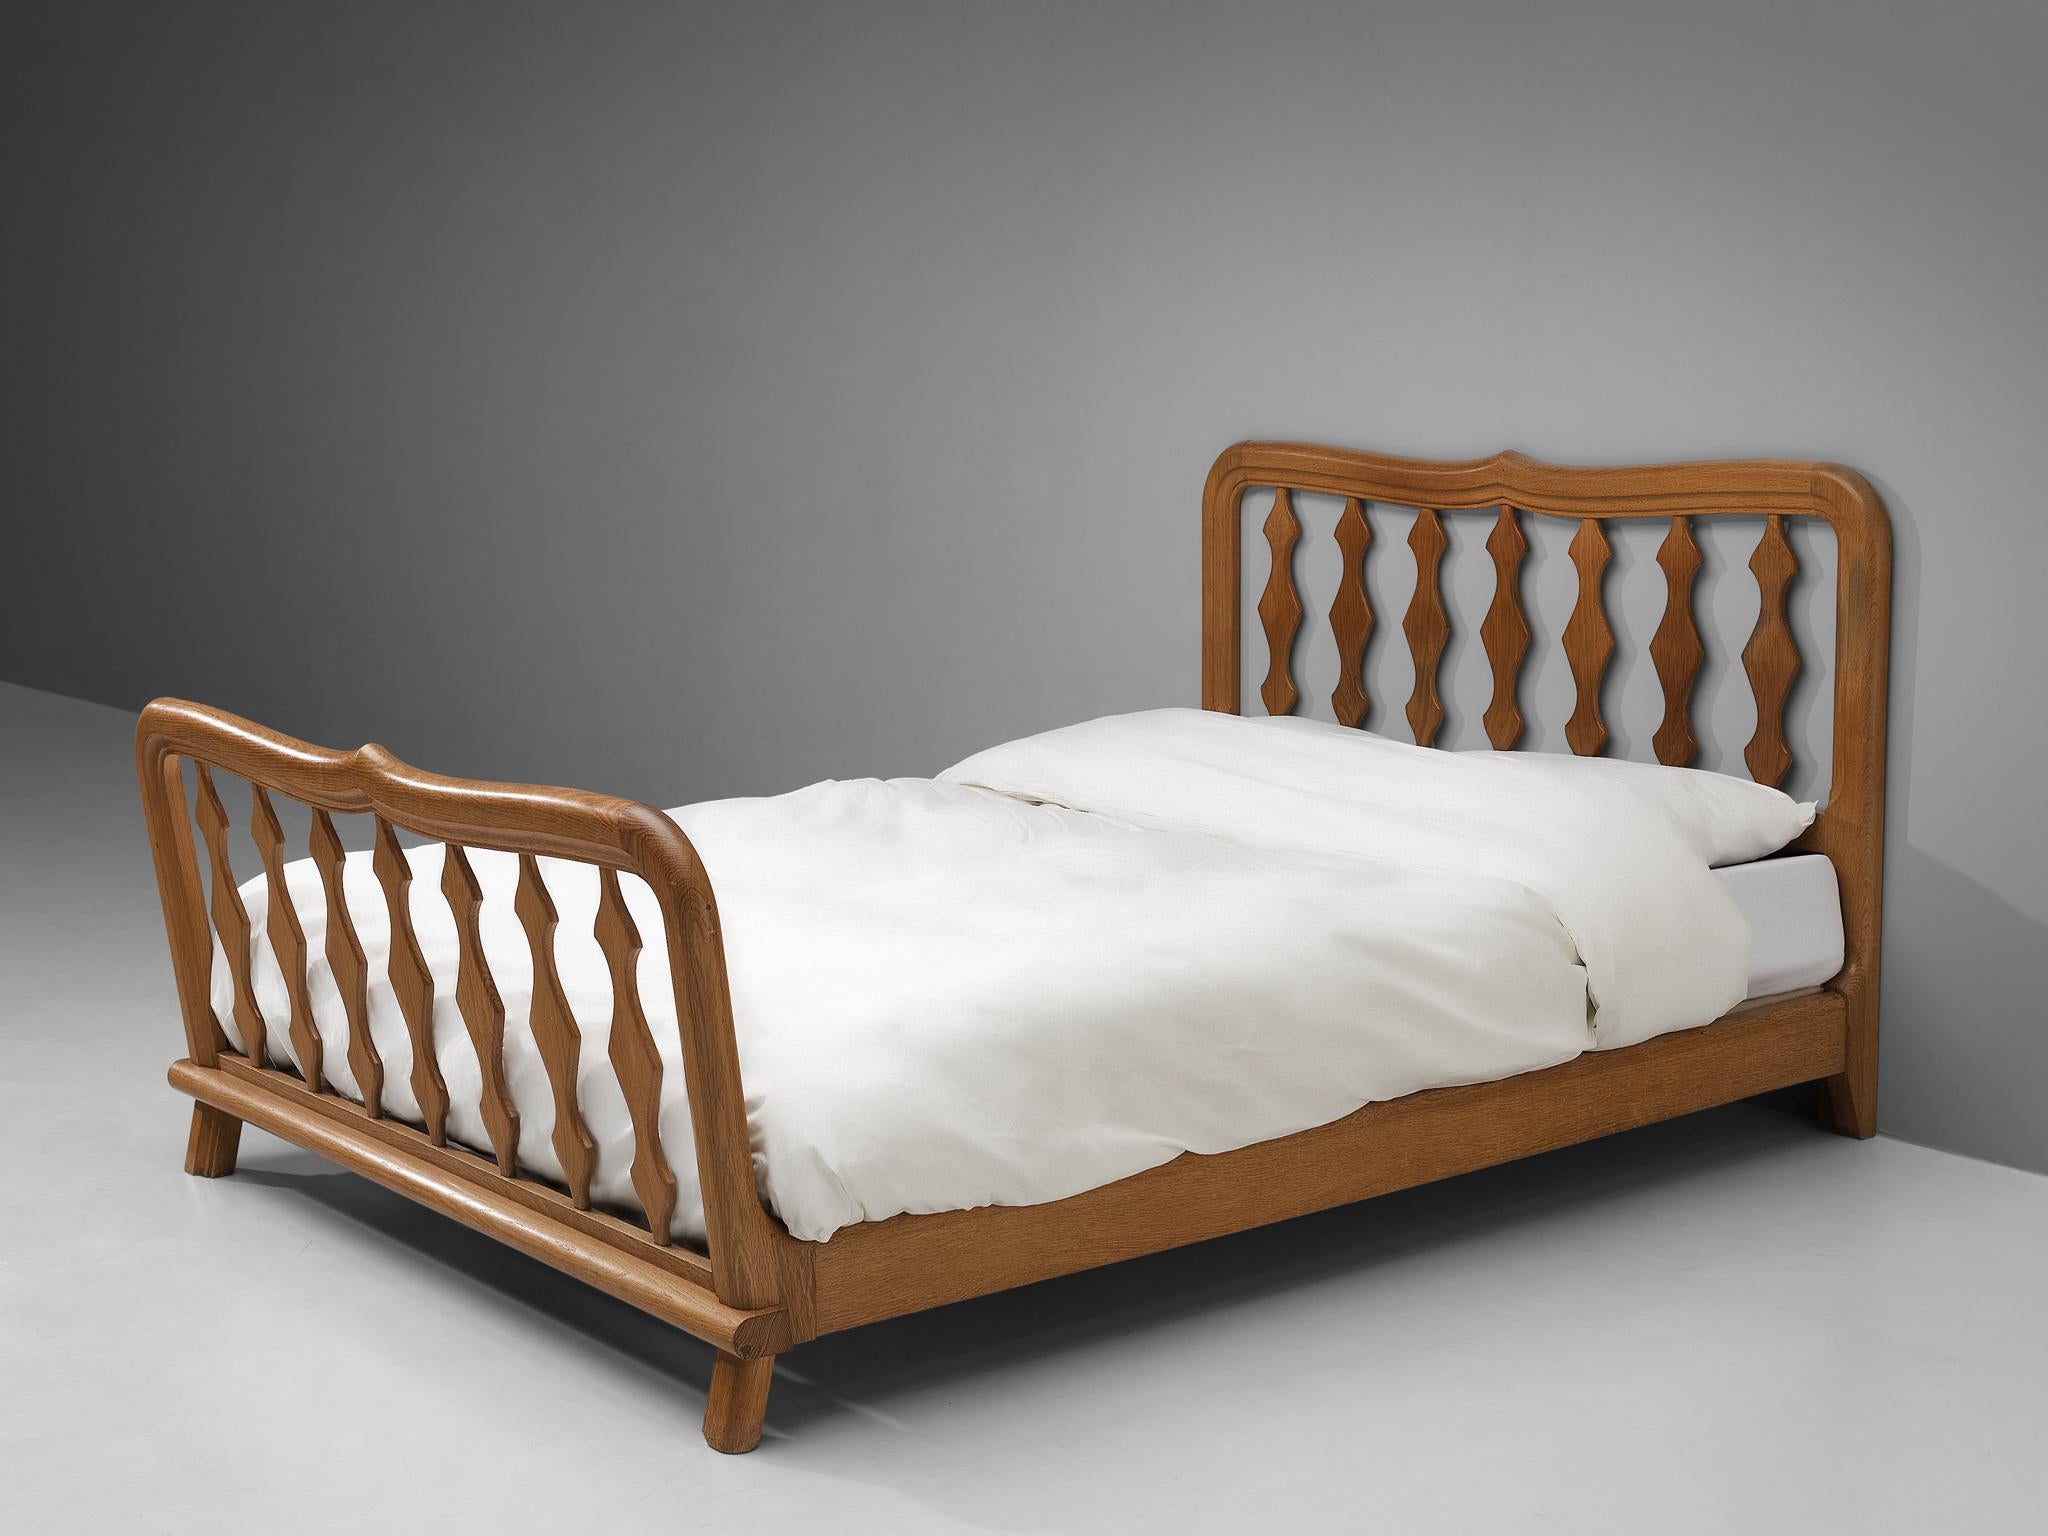 Guillerme et Chambron, double bed, oak, France, 1960s

This bed's main feature is obvious: It's all about the wood work. The excellent crafted frame has stunning sculpted detailing on the slats, which gives it a very luxurious and cosy feel to lie